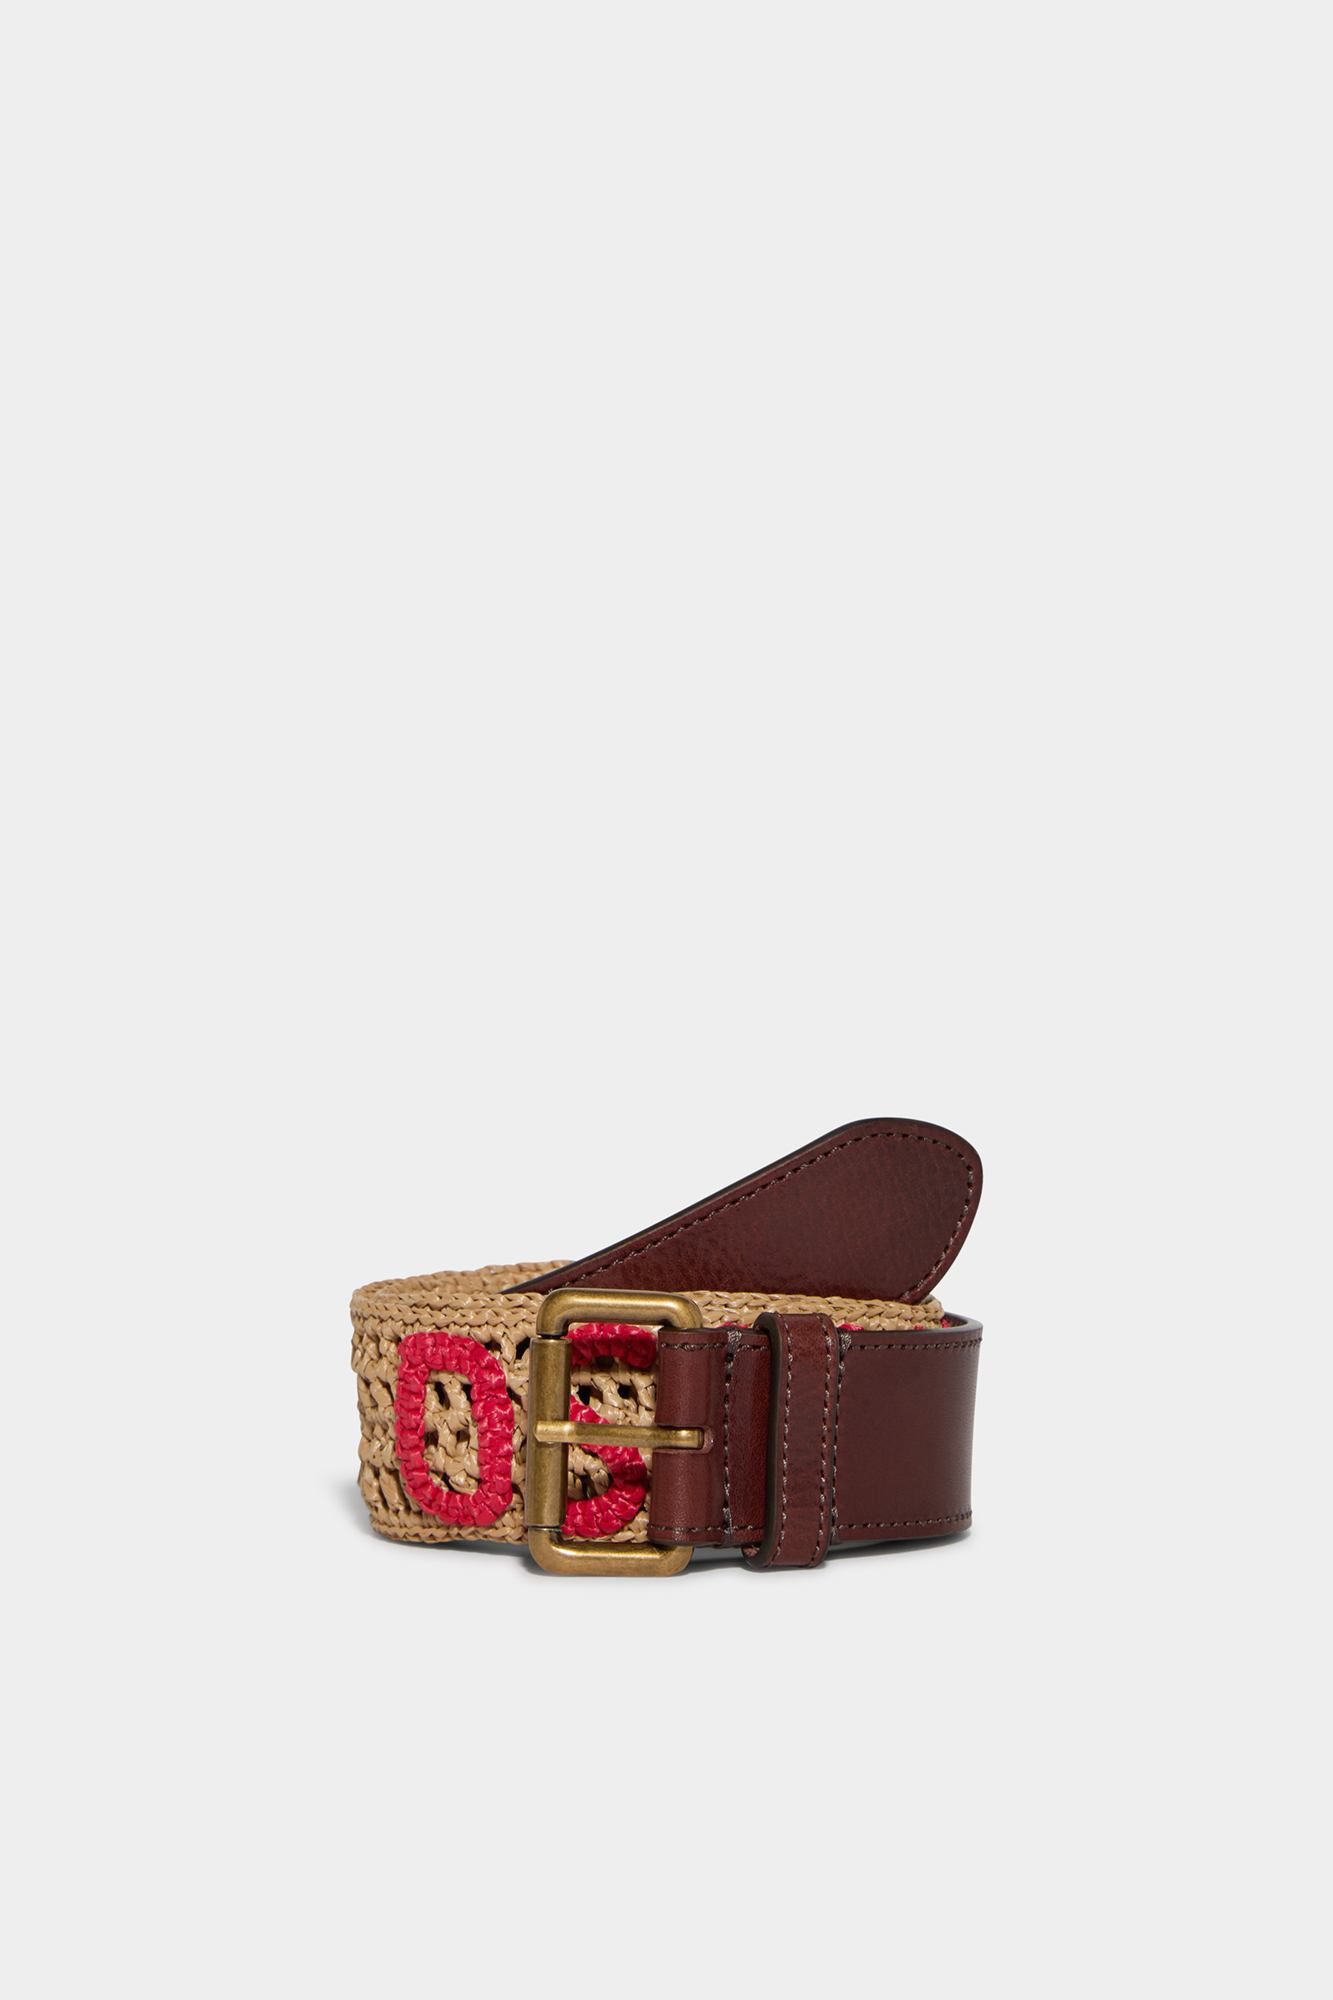 Dsquared2 Women's Red Textured Leather Metal Buckle Decorated Belt Sz M L 